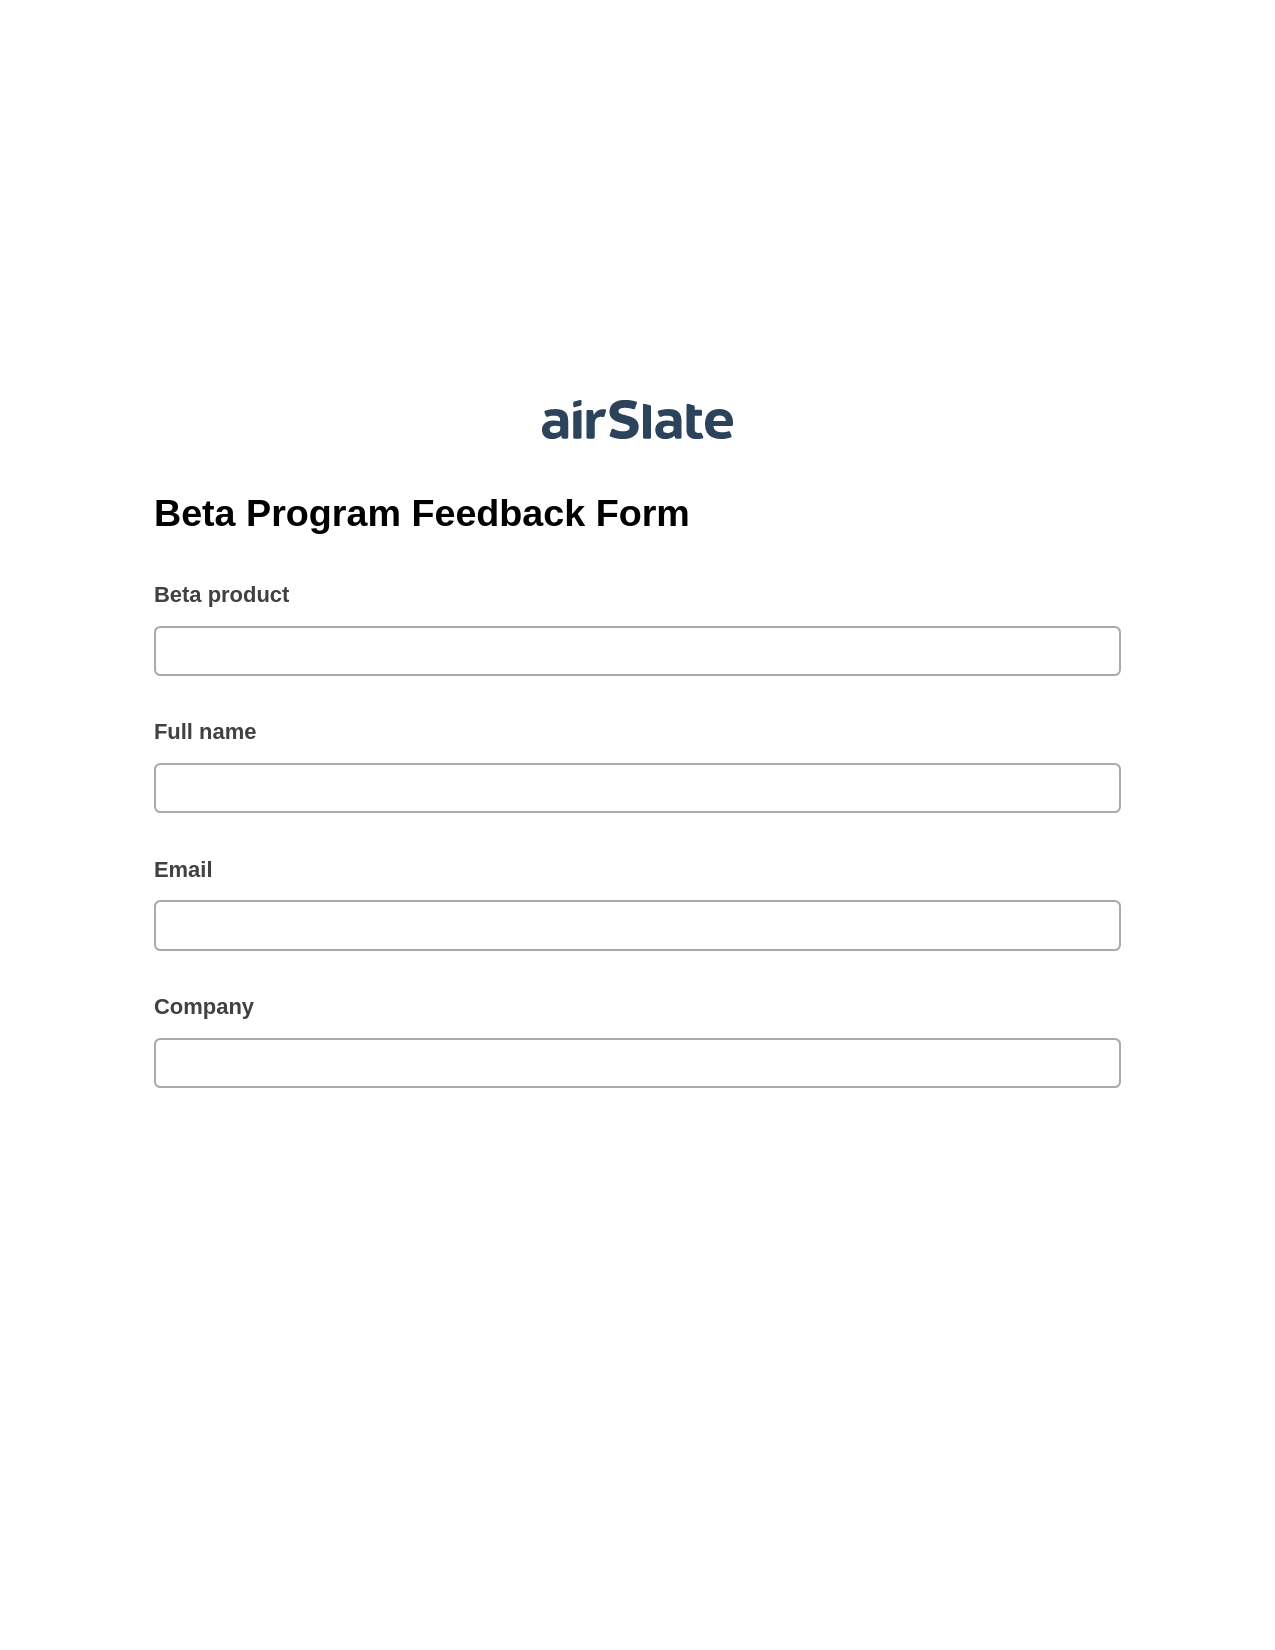 Beta Program Feedback Form Pre-fill Document Bot, Add Tags to Slate Bot, Export to Google Sheet Bot